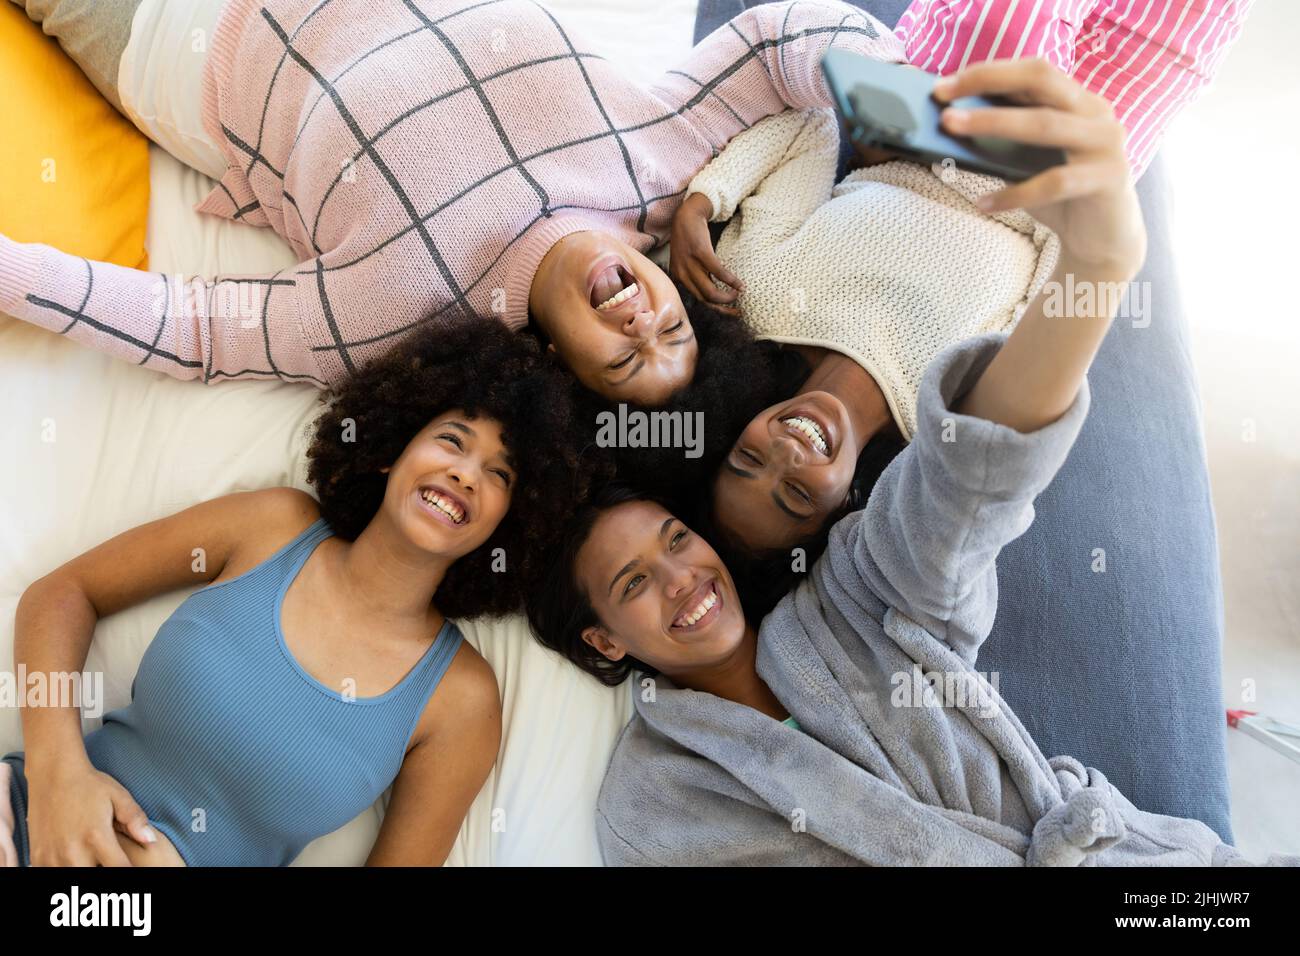 High angle view of biracial woman taking selfie over cellphone with cheerful friends lying on bed Stock Photo